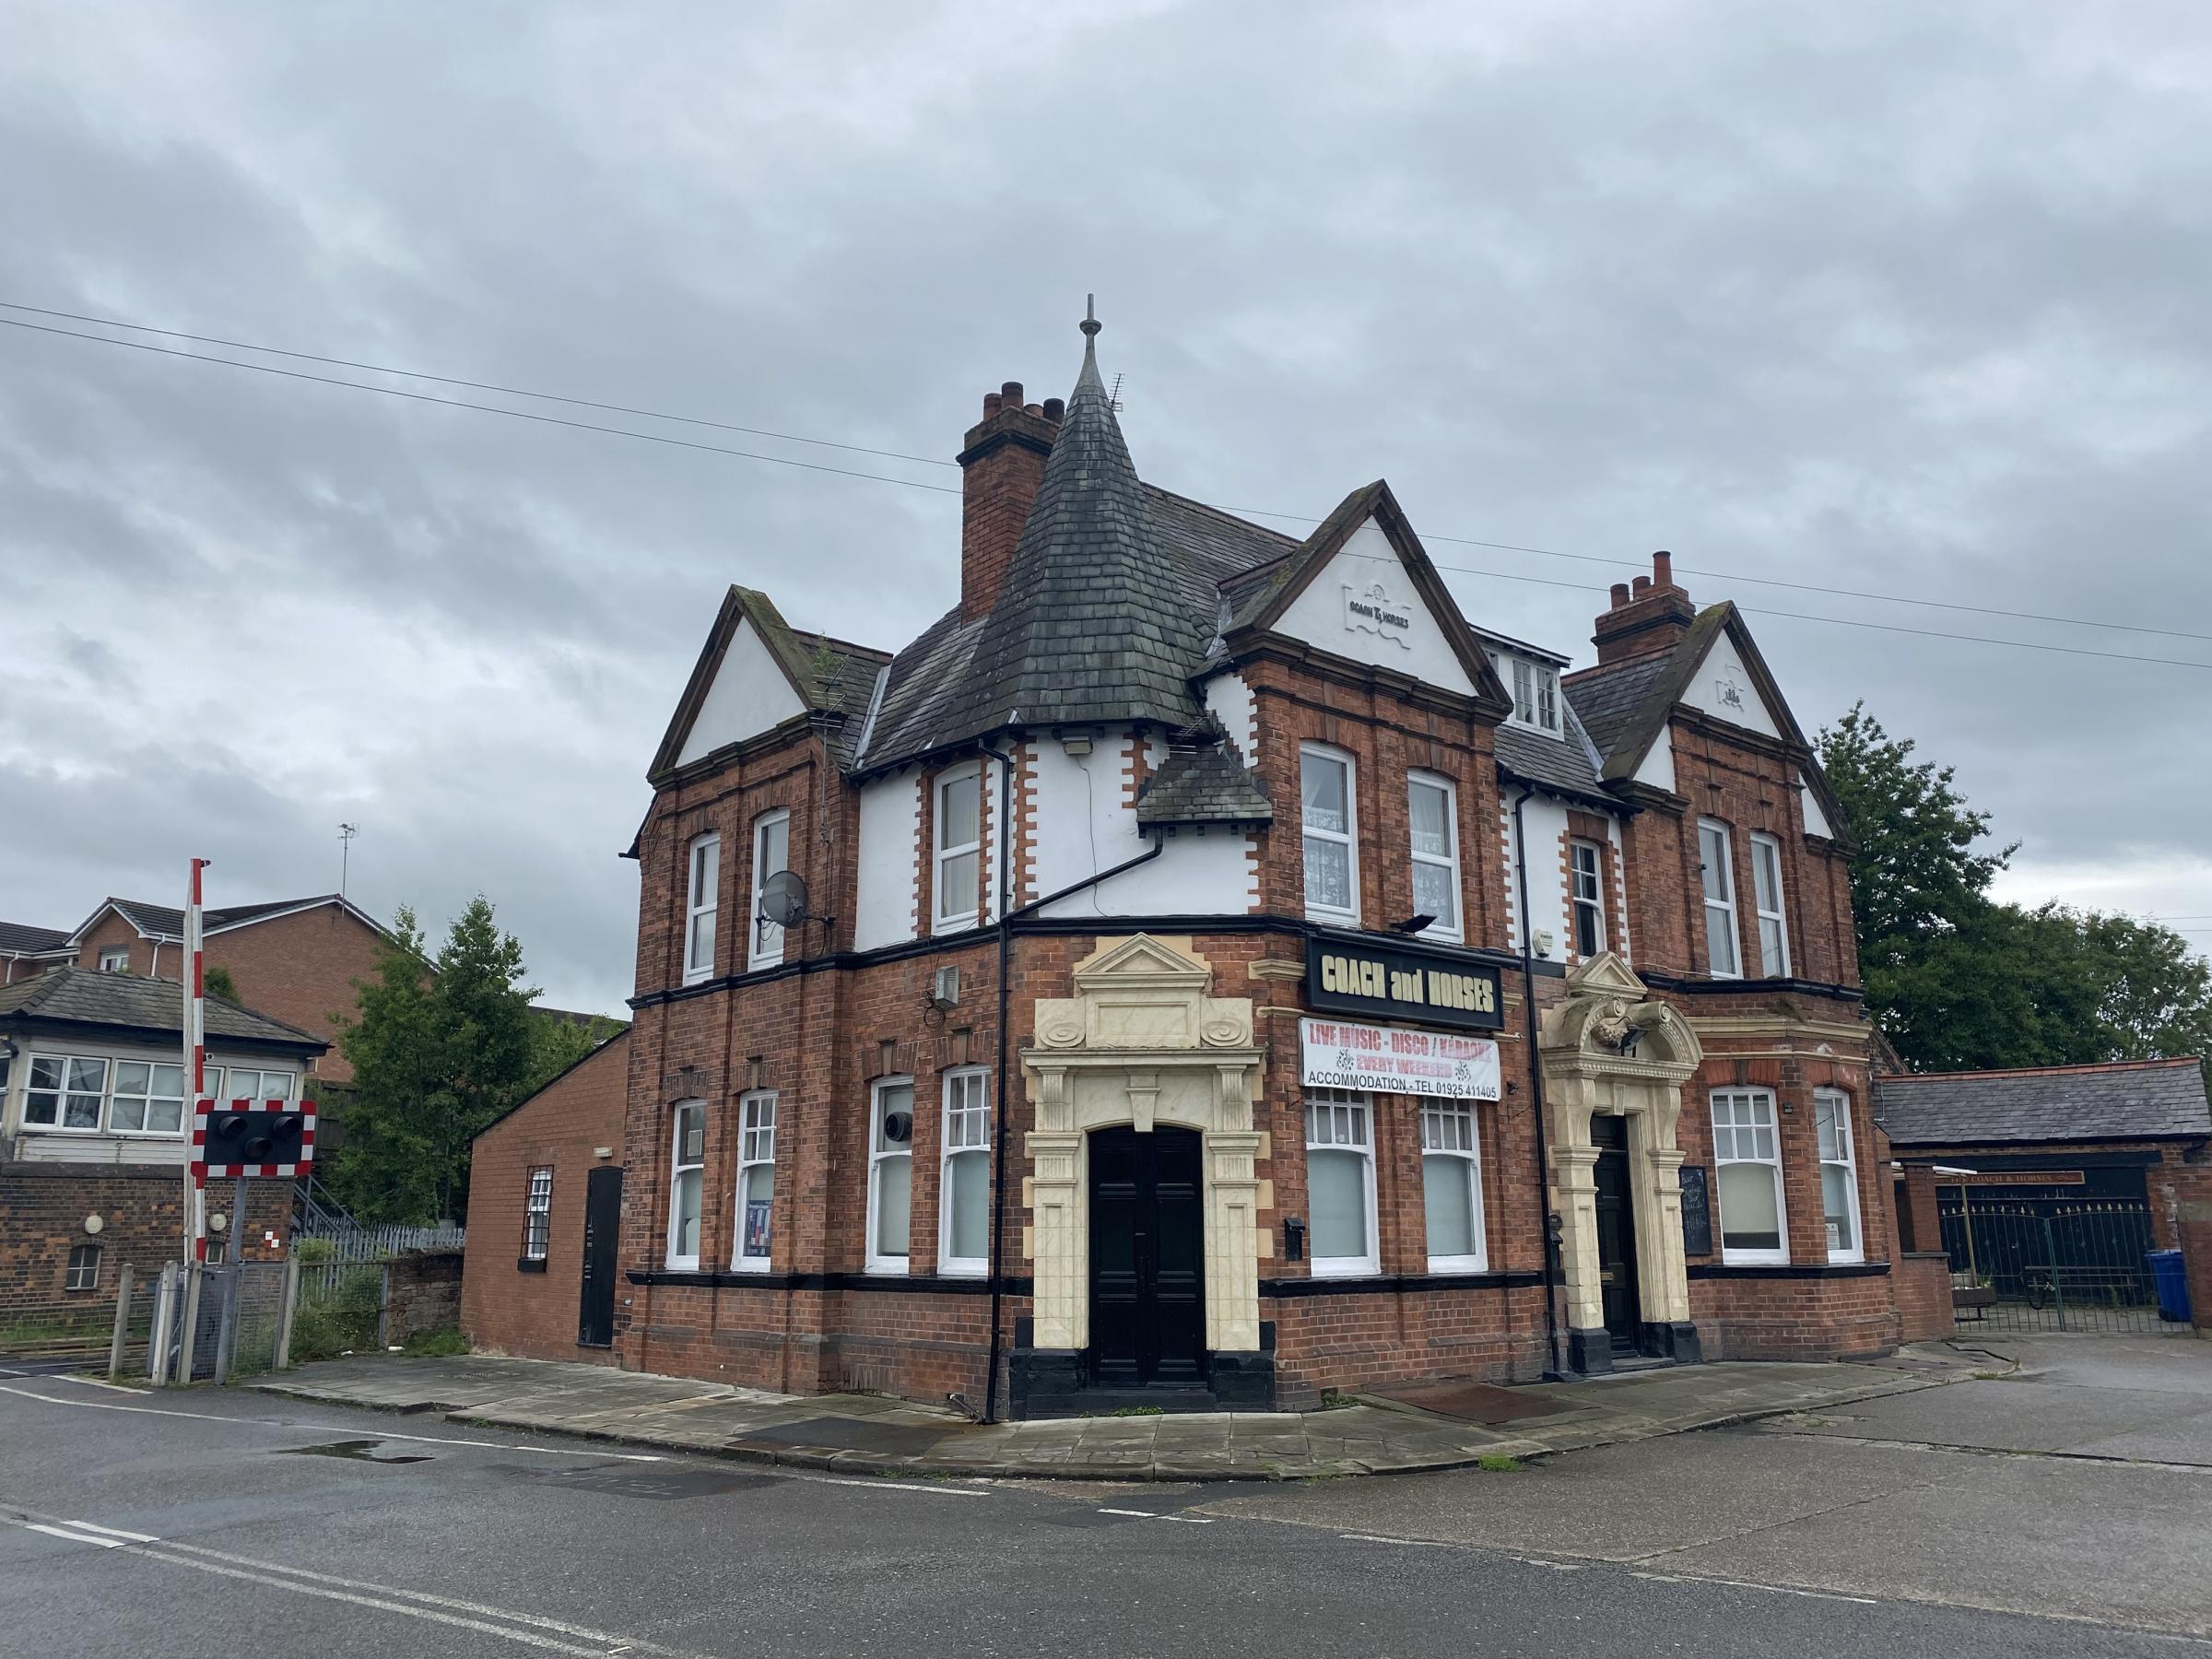 The Coach and Horses pub in Sankey Bridges has been listed for sale